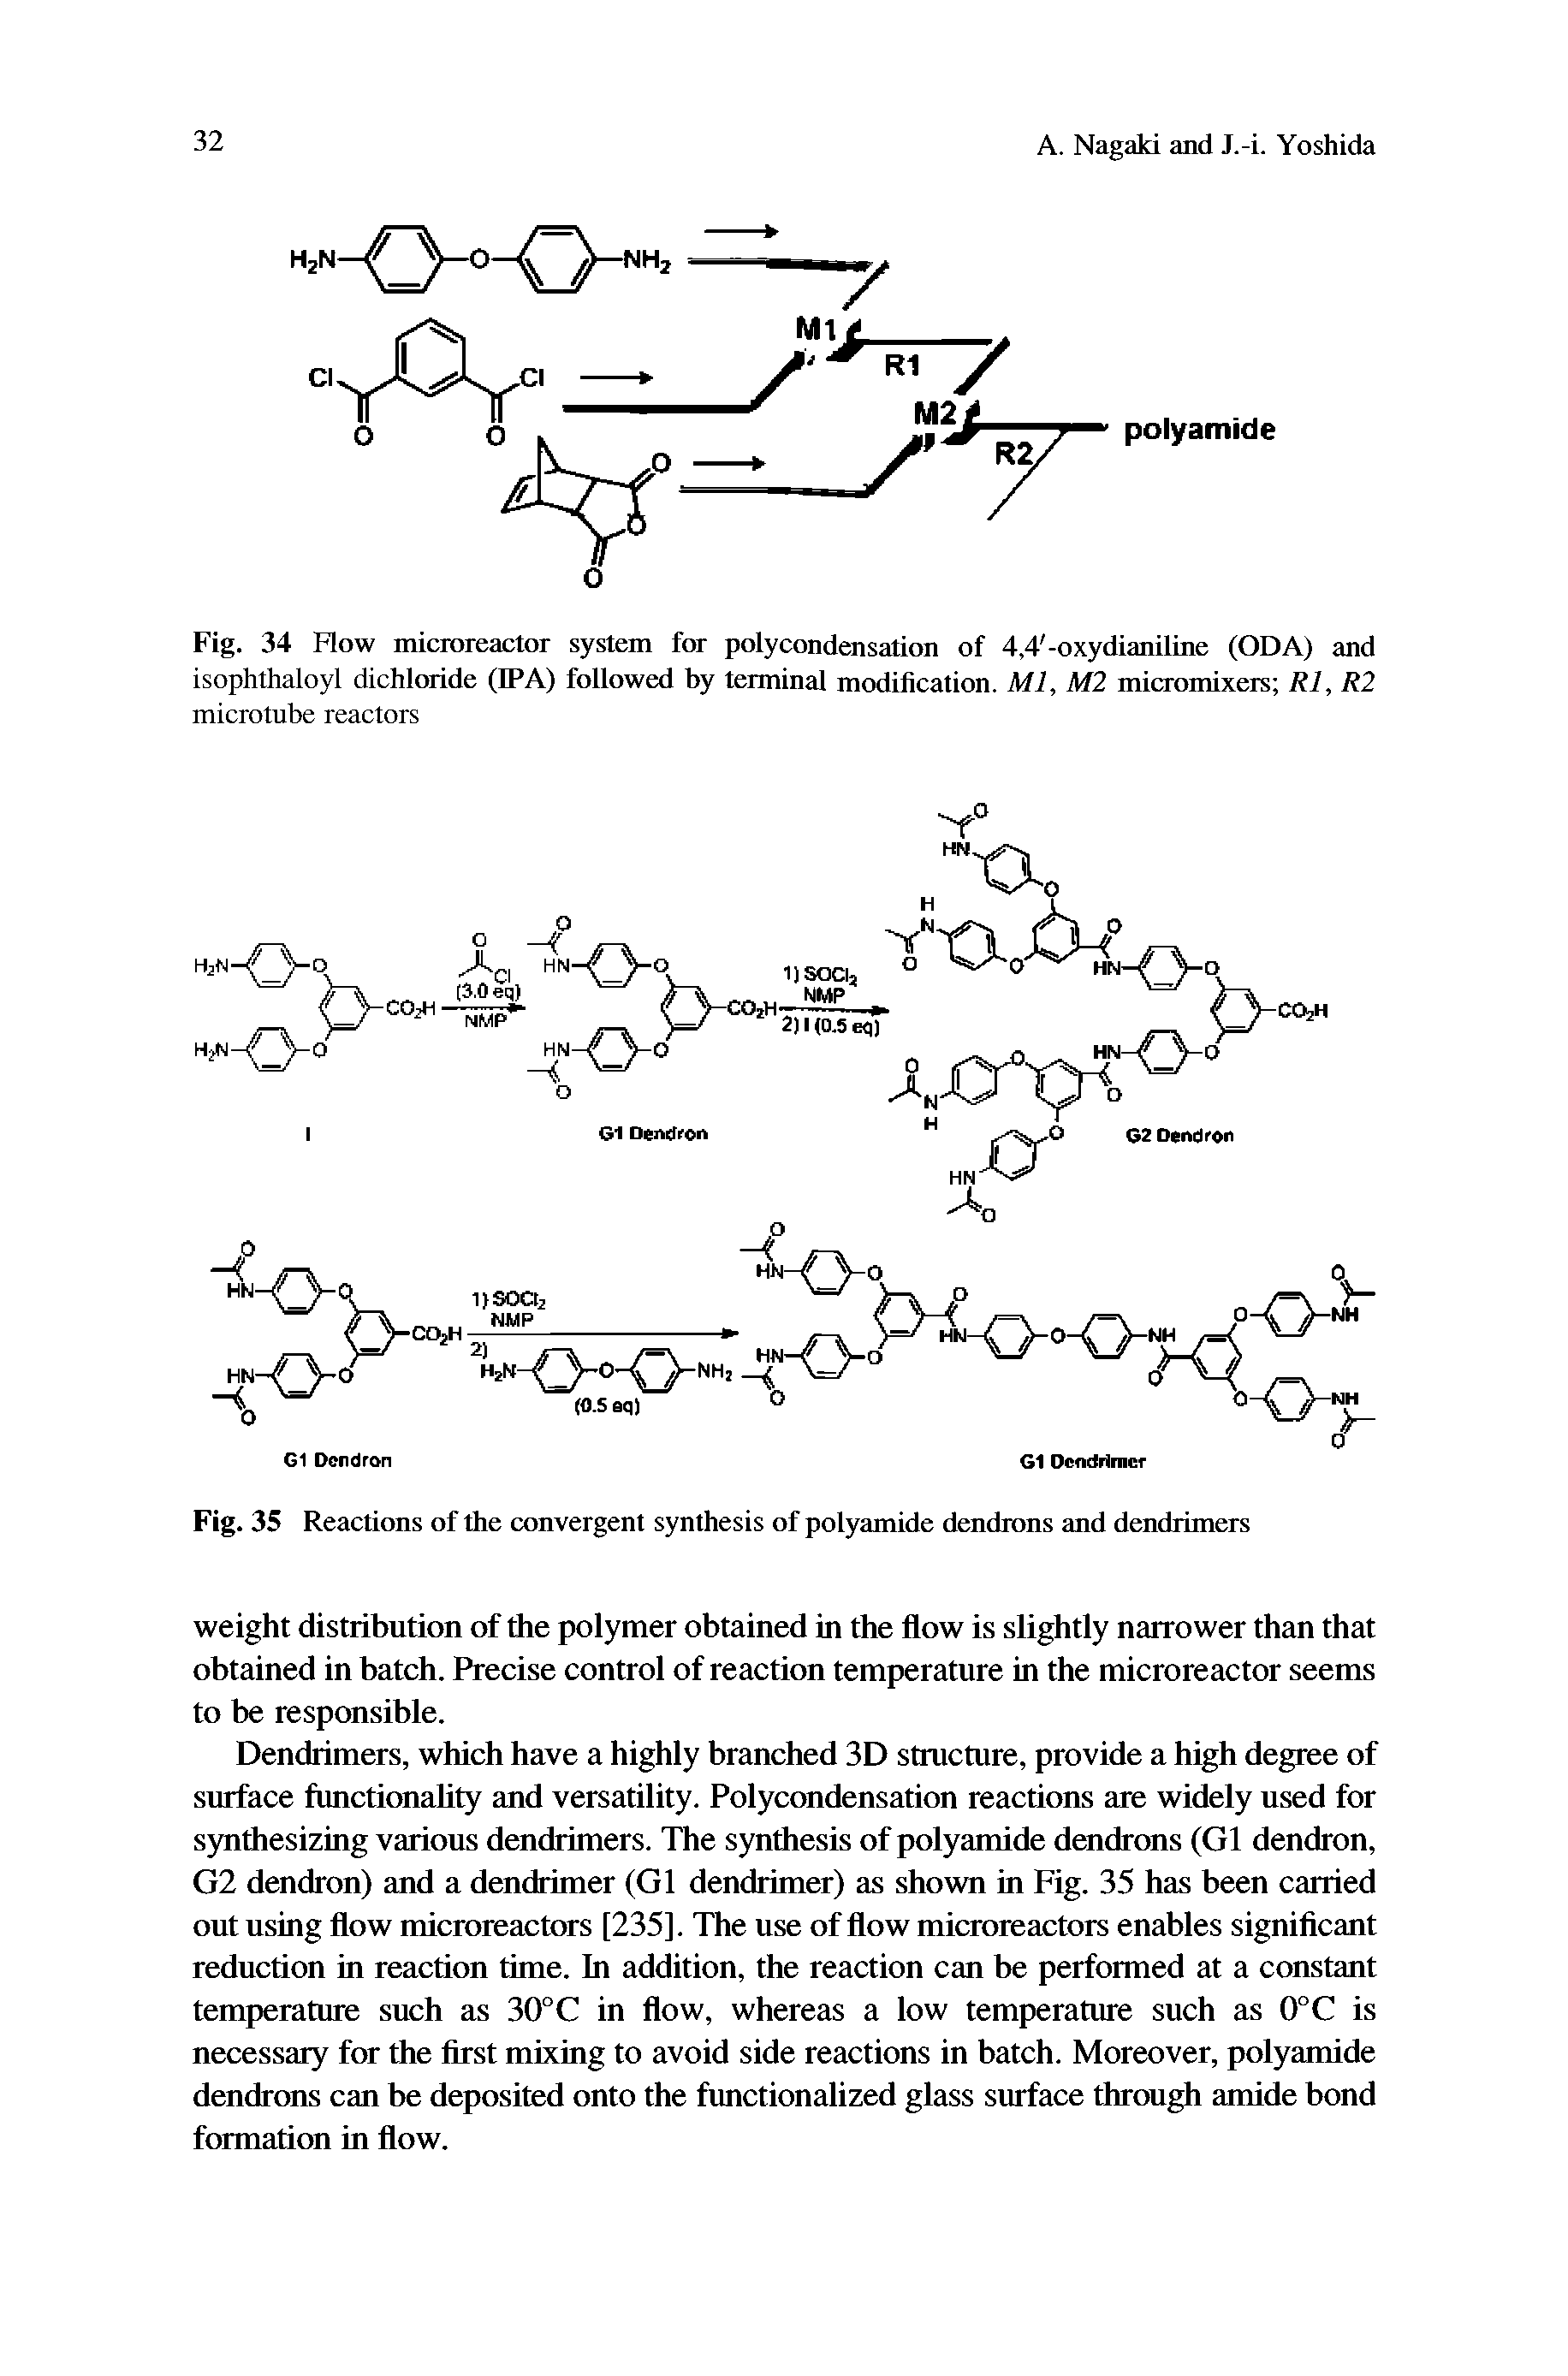 Fig. 35 Reactions of the convergent synthesis of polyamide dendrons and dendrimers...